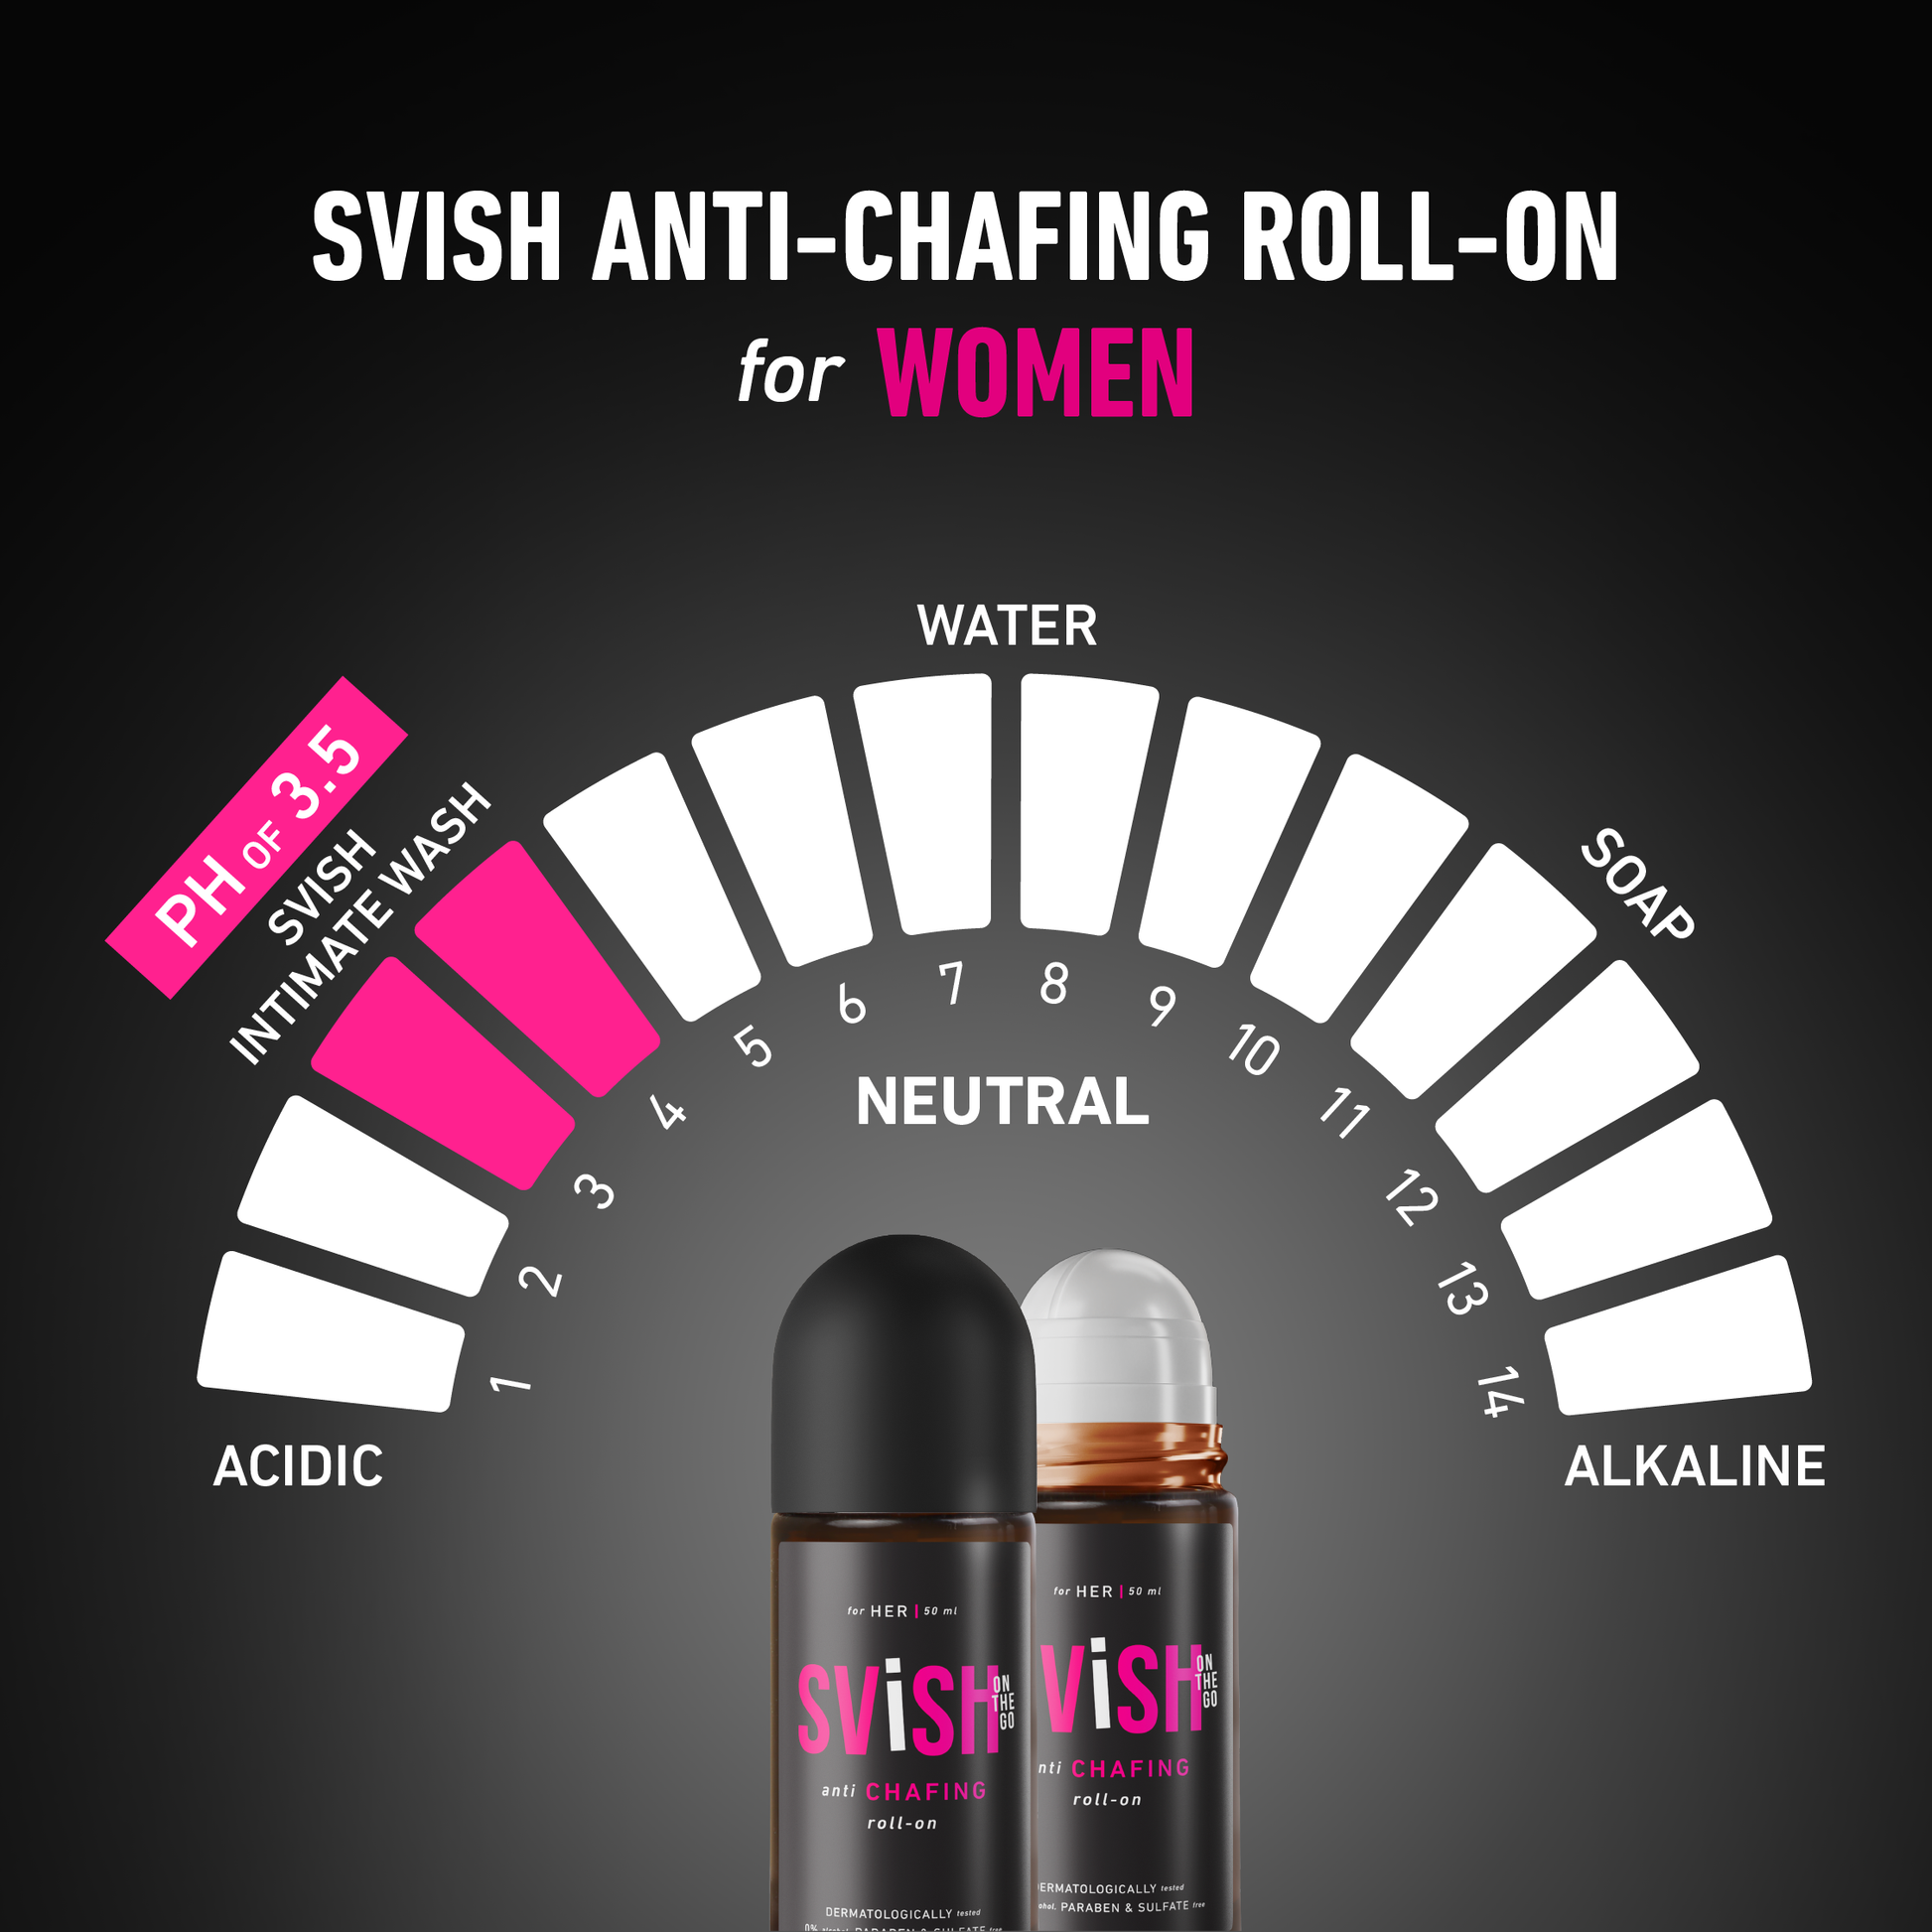 SVISH ANTI-CHAFING ROLL-ON FOR WOMEN